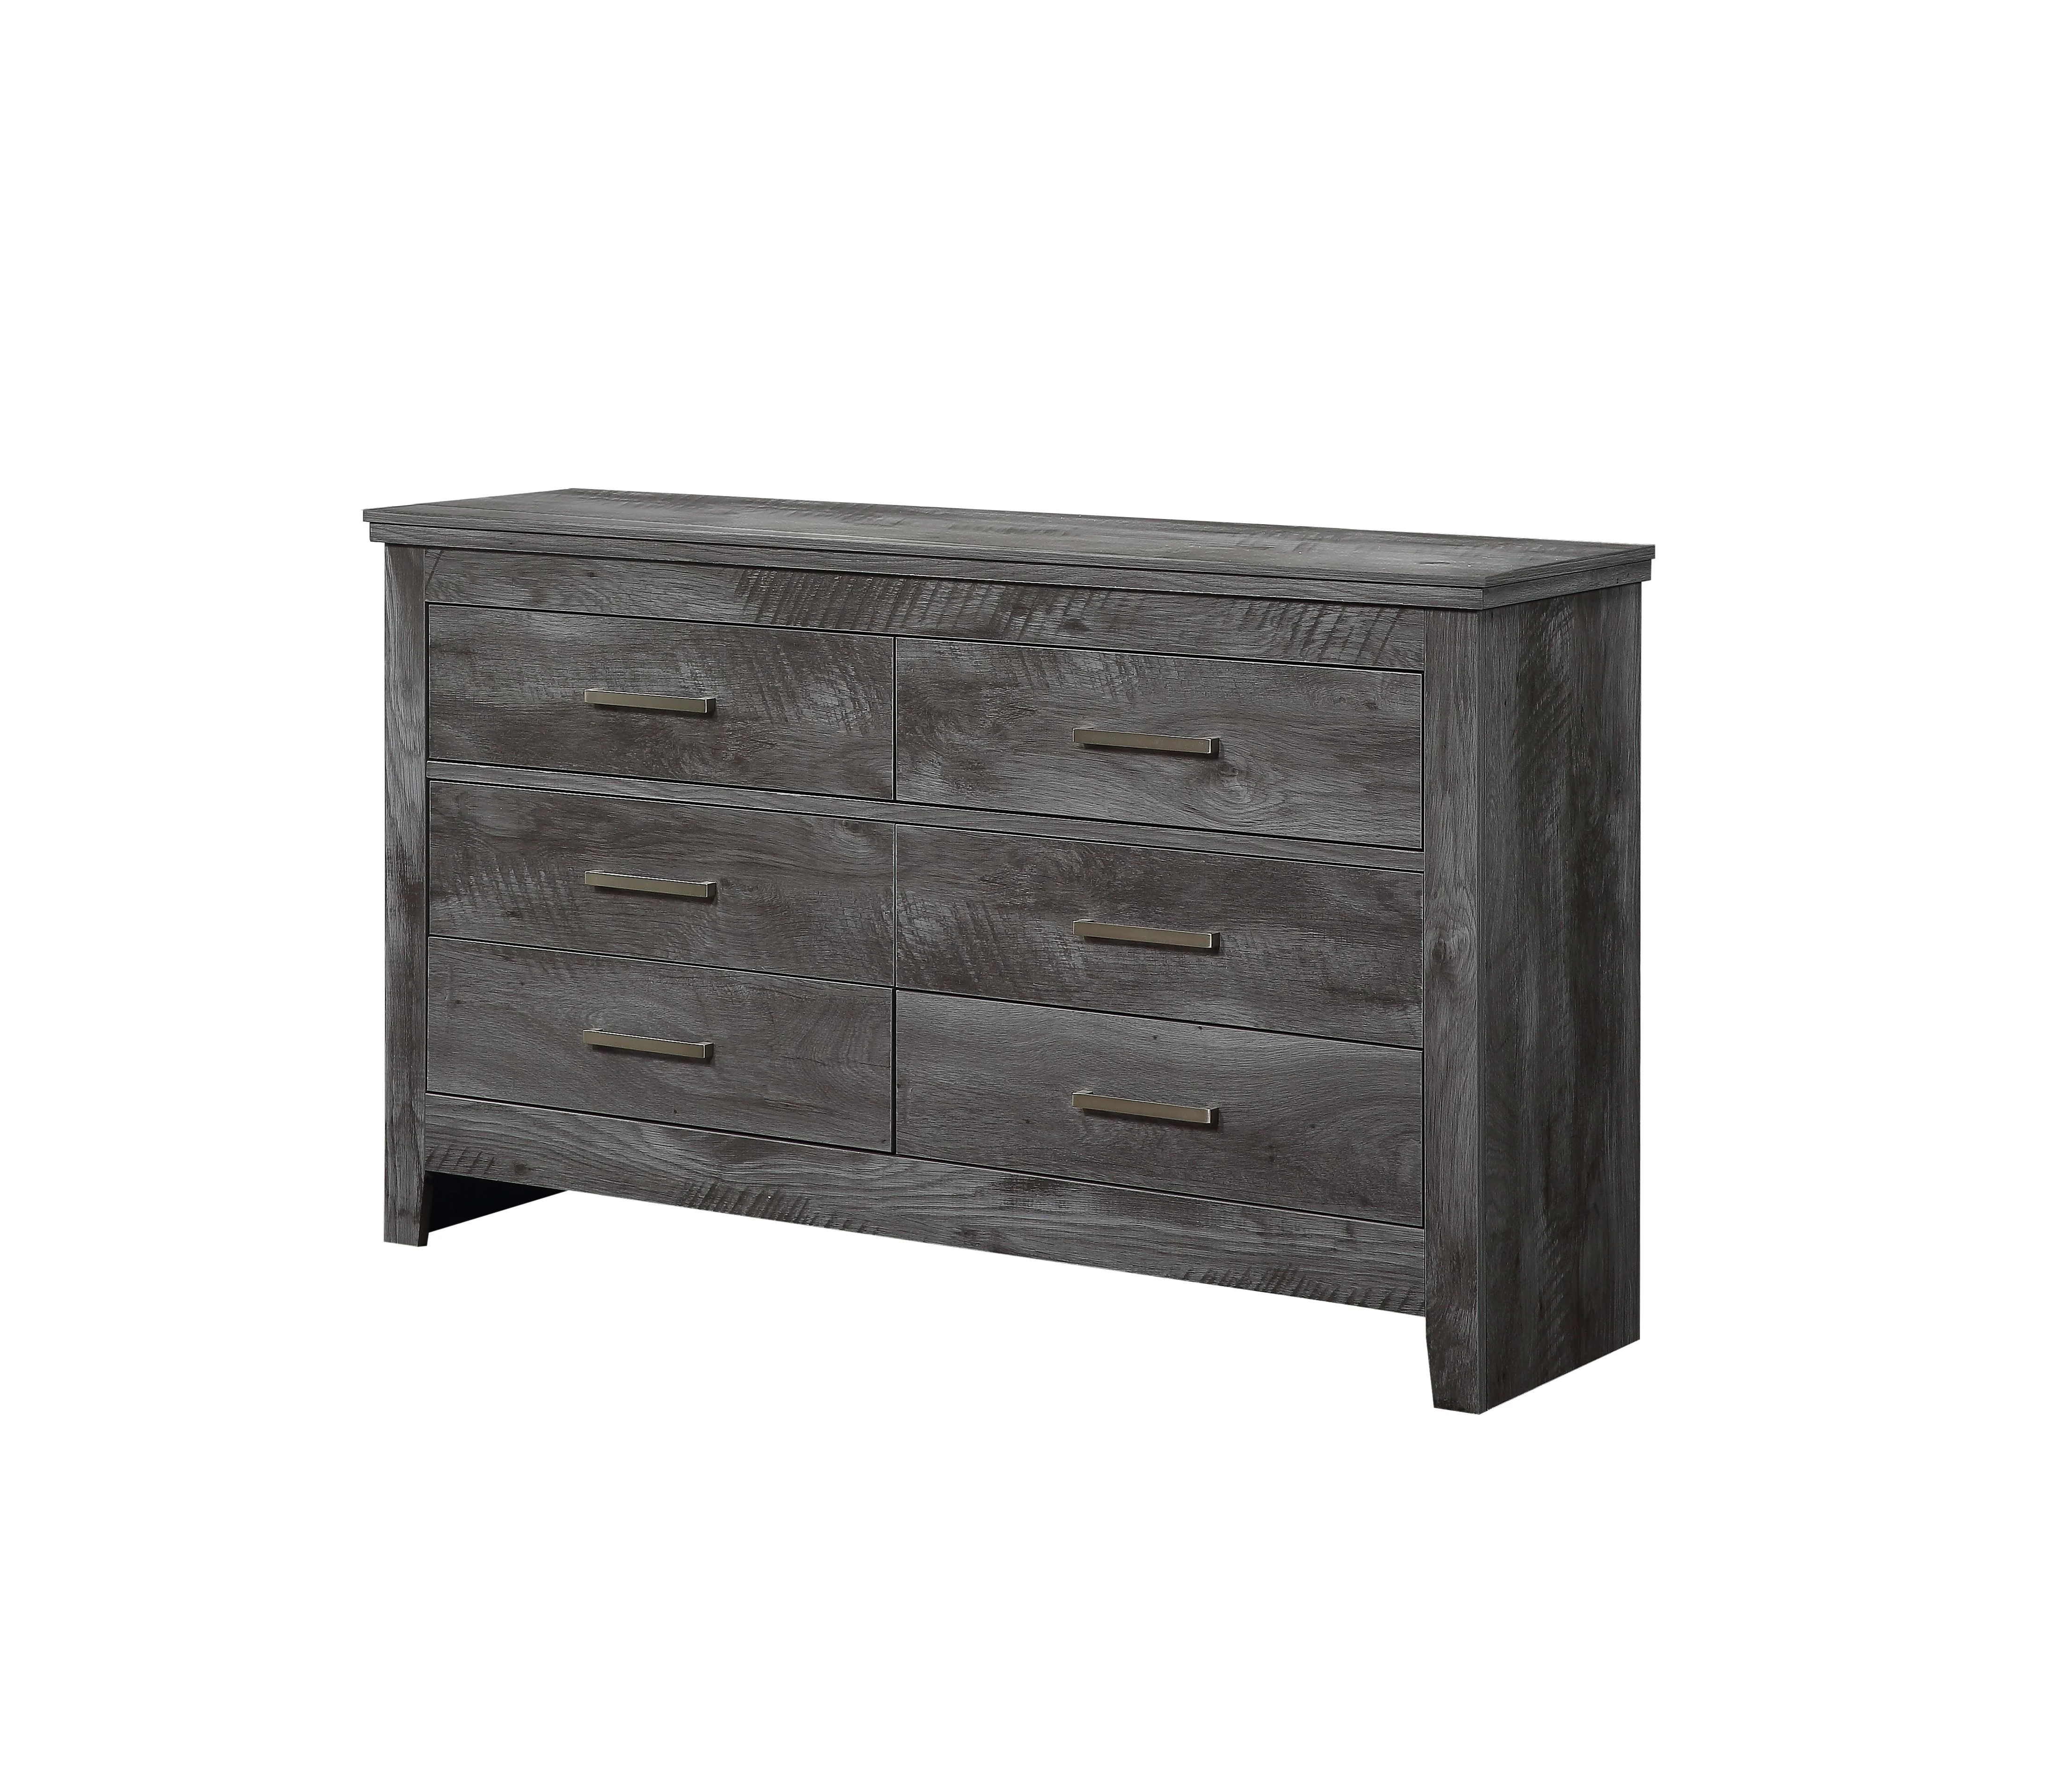 

Rustic Dresser with 6 Draw Rustic Home Furniture for Bedroom Livingroom inRustic Gray Oak 57" x 16" x 34"H